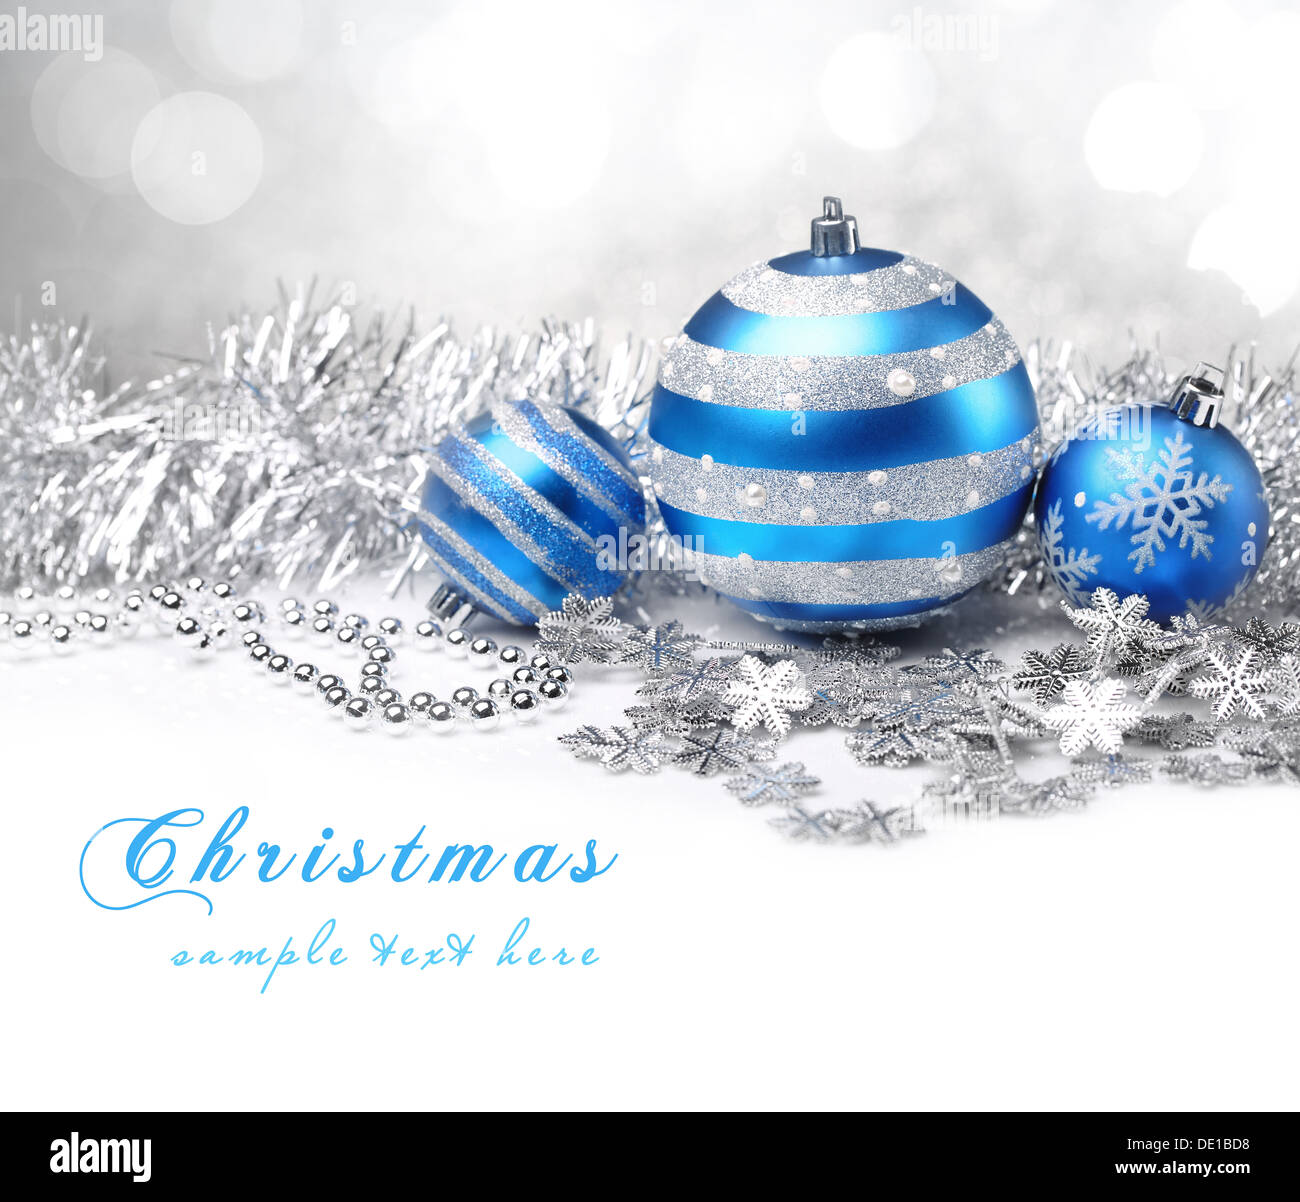 Christmas balls and gifts on abstract background. Stock Photo